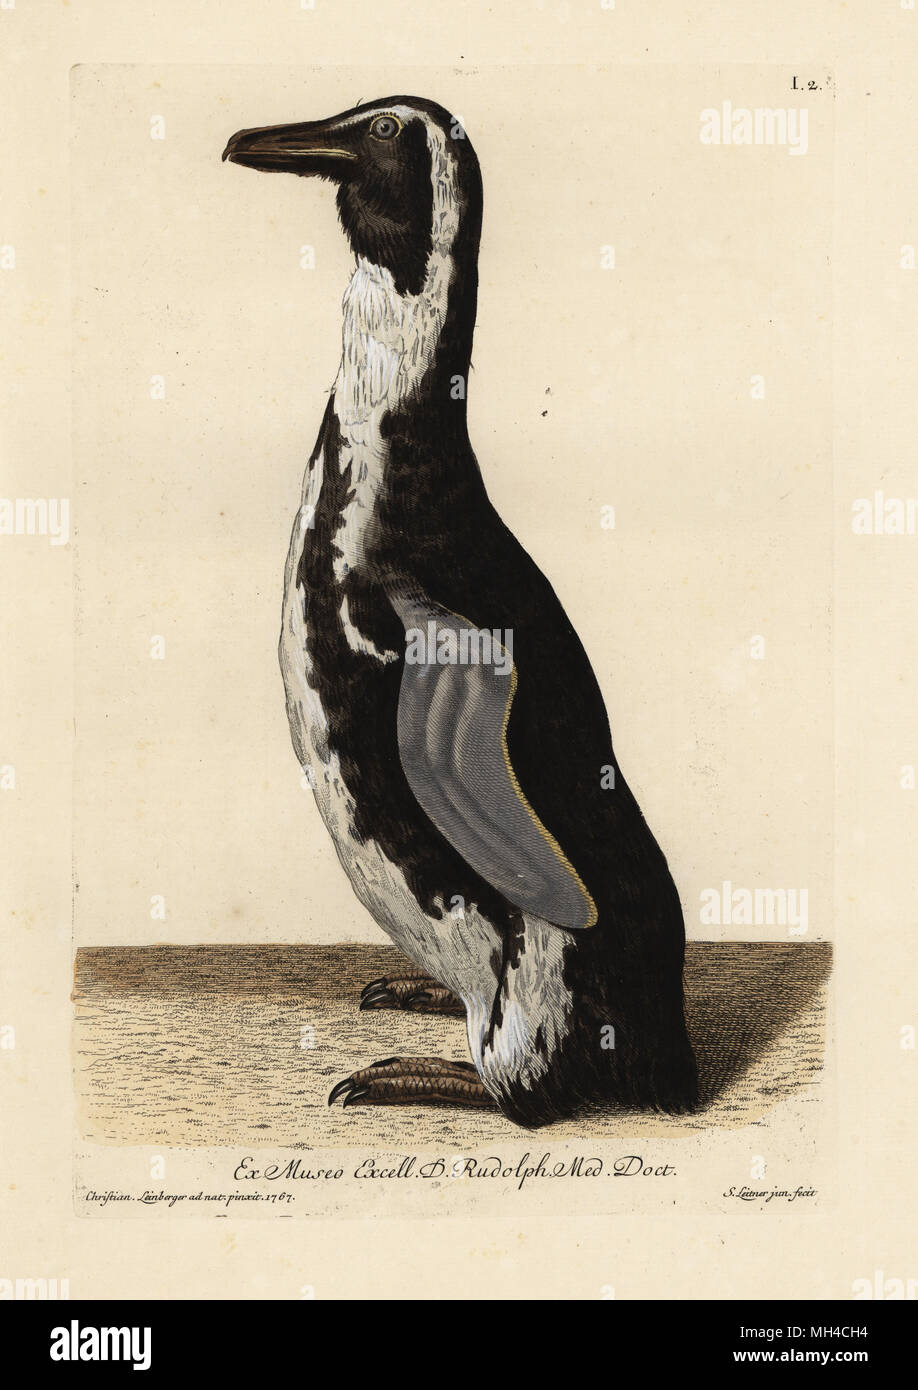 African penguin, Spheniscus demersus (Pinguin de Bengale, Diomedea demersa). Handcoloured copperplate engraving by S. Leitner jun. after an illustration from nature by Christian Leinberger from Georg Wolfgang Knorr's Deliciae Naturae Selectae of Kabinet van Zeldzaamheden der Natuur, Blusse and Son, Nuremberg, 1771. Specimen from a Wunderkammer or Cabinet of Curiosities owned by D. Rudolph. Stock Photo